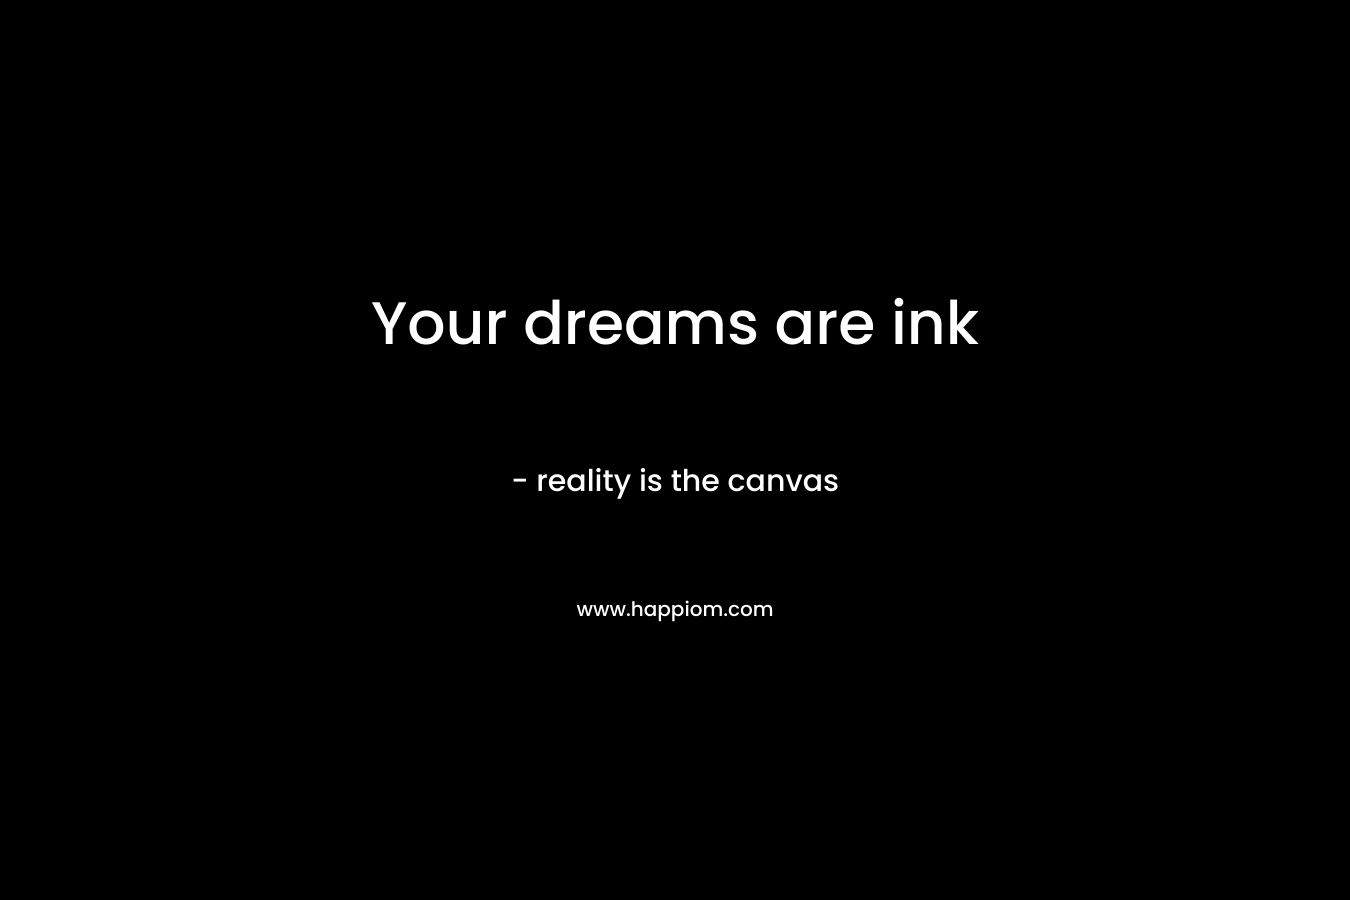 Your dreams are ink